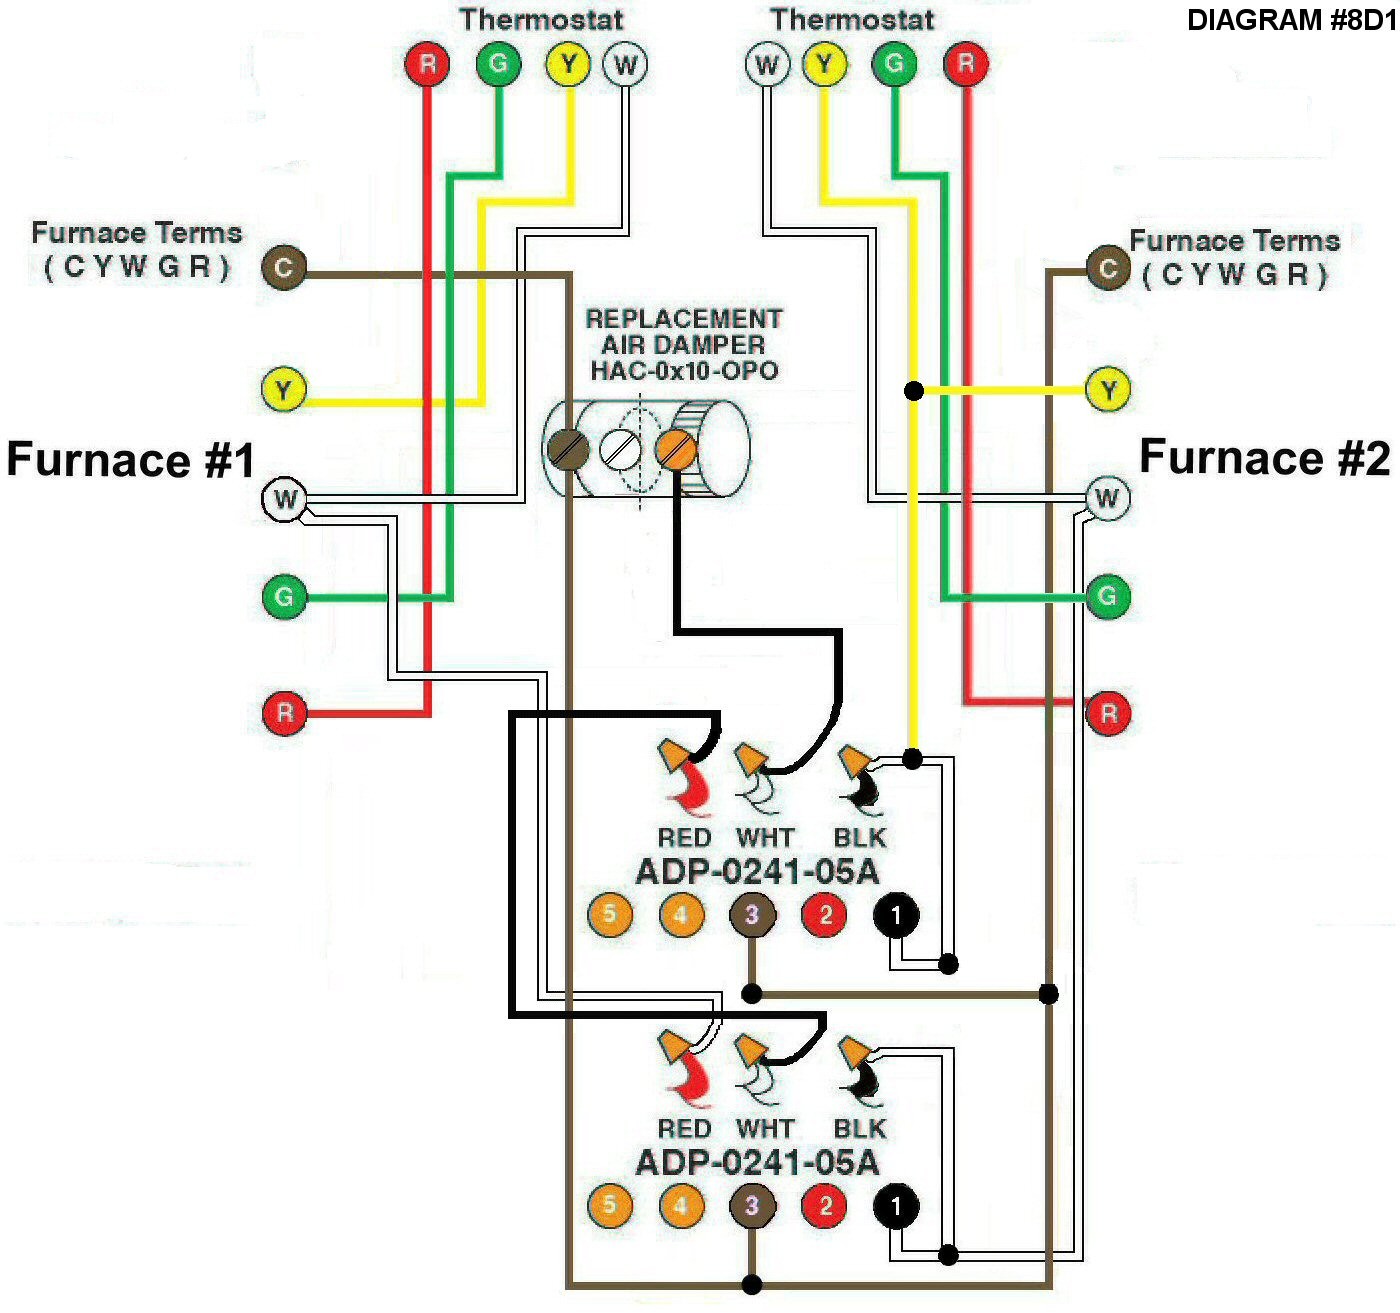 home ac thermostat wiring diagram home ac thermostat wiring air conditioning wiring diagrams home ac thermostat